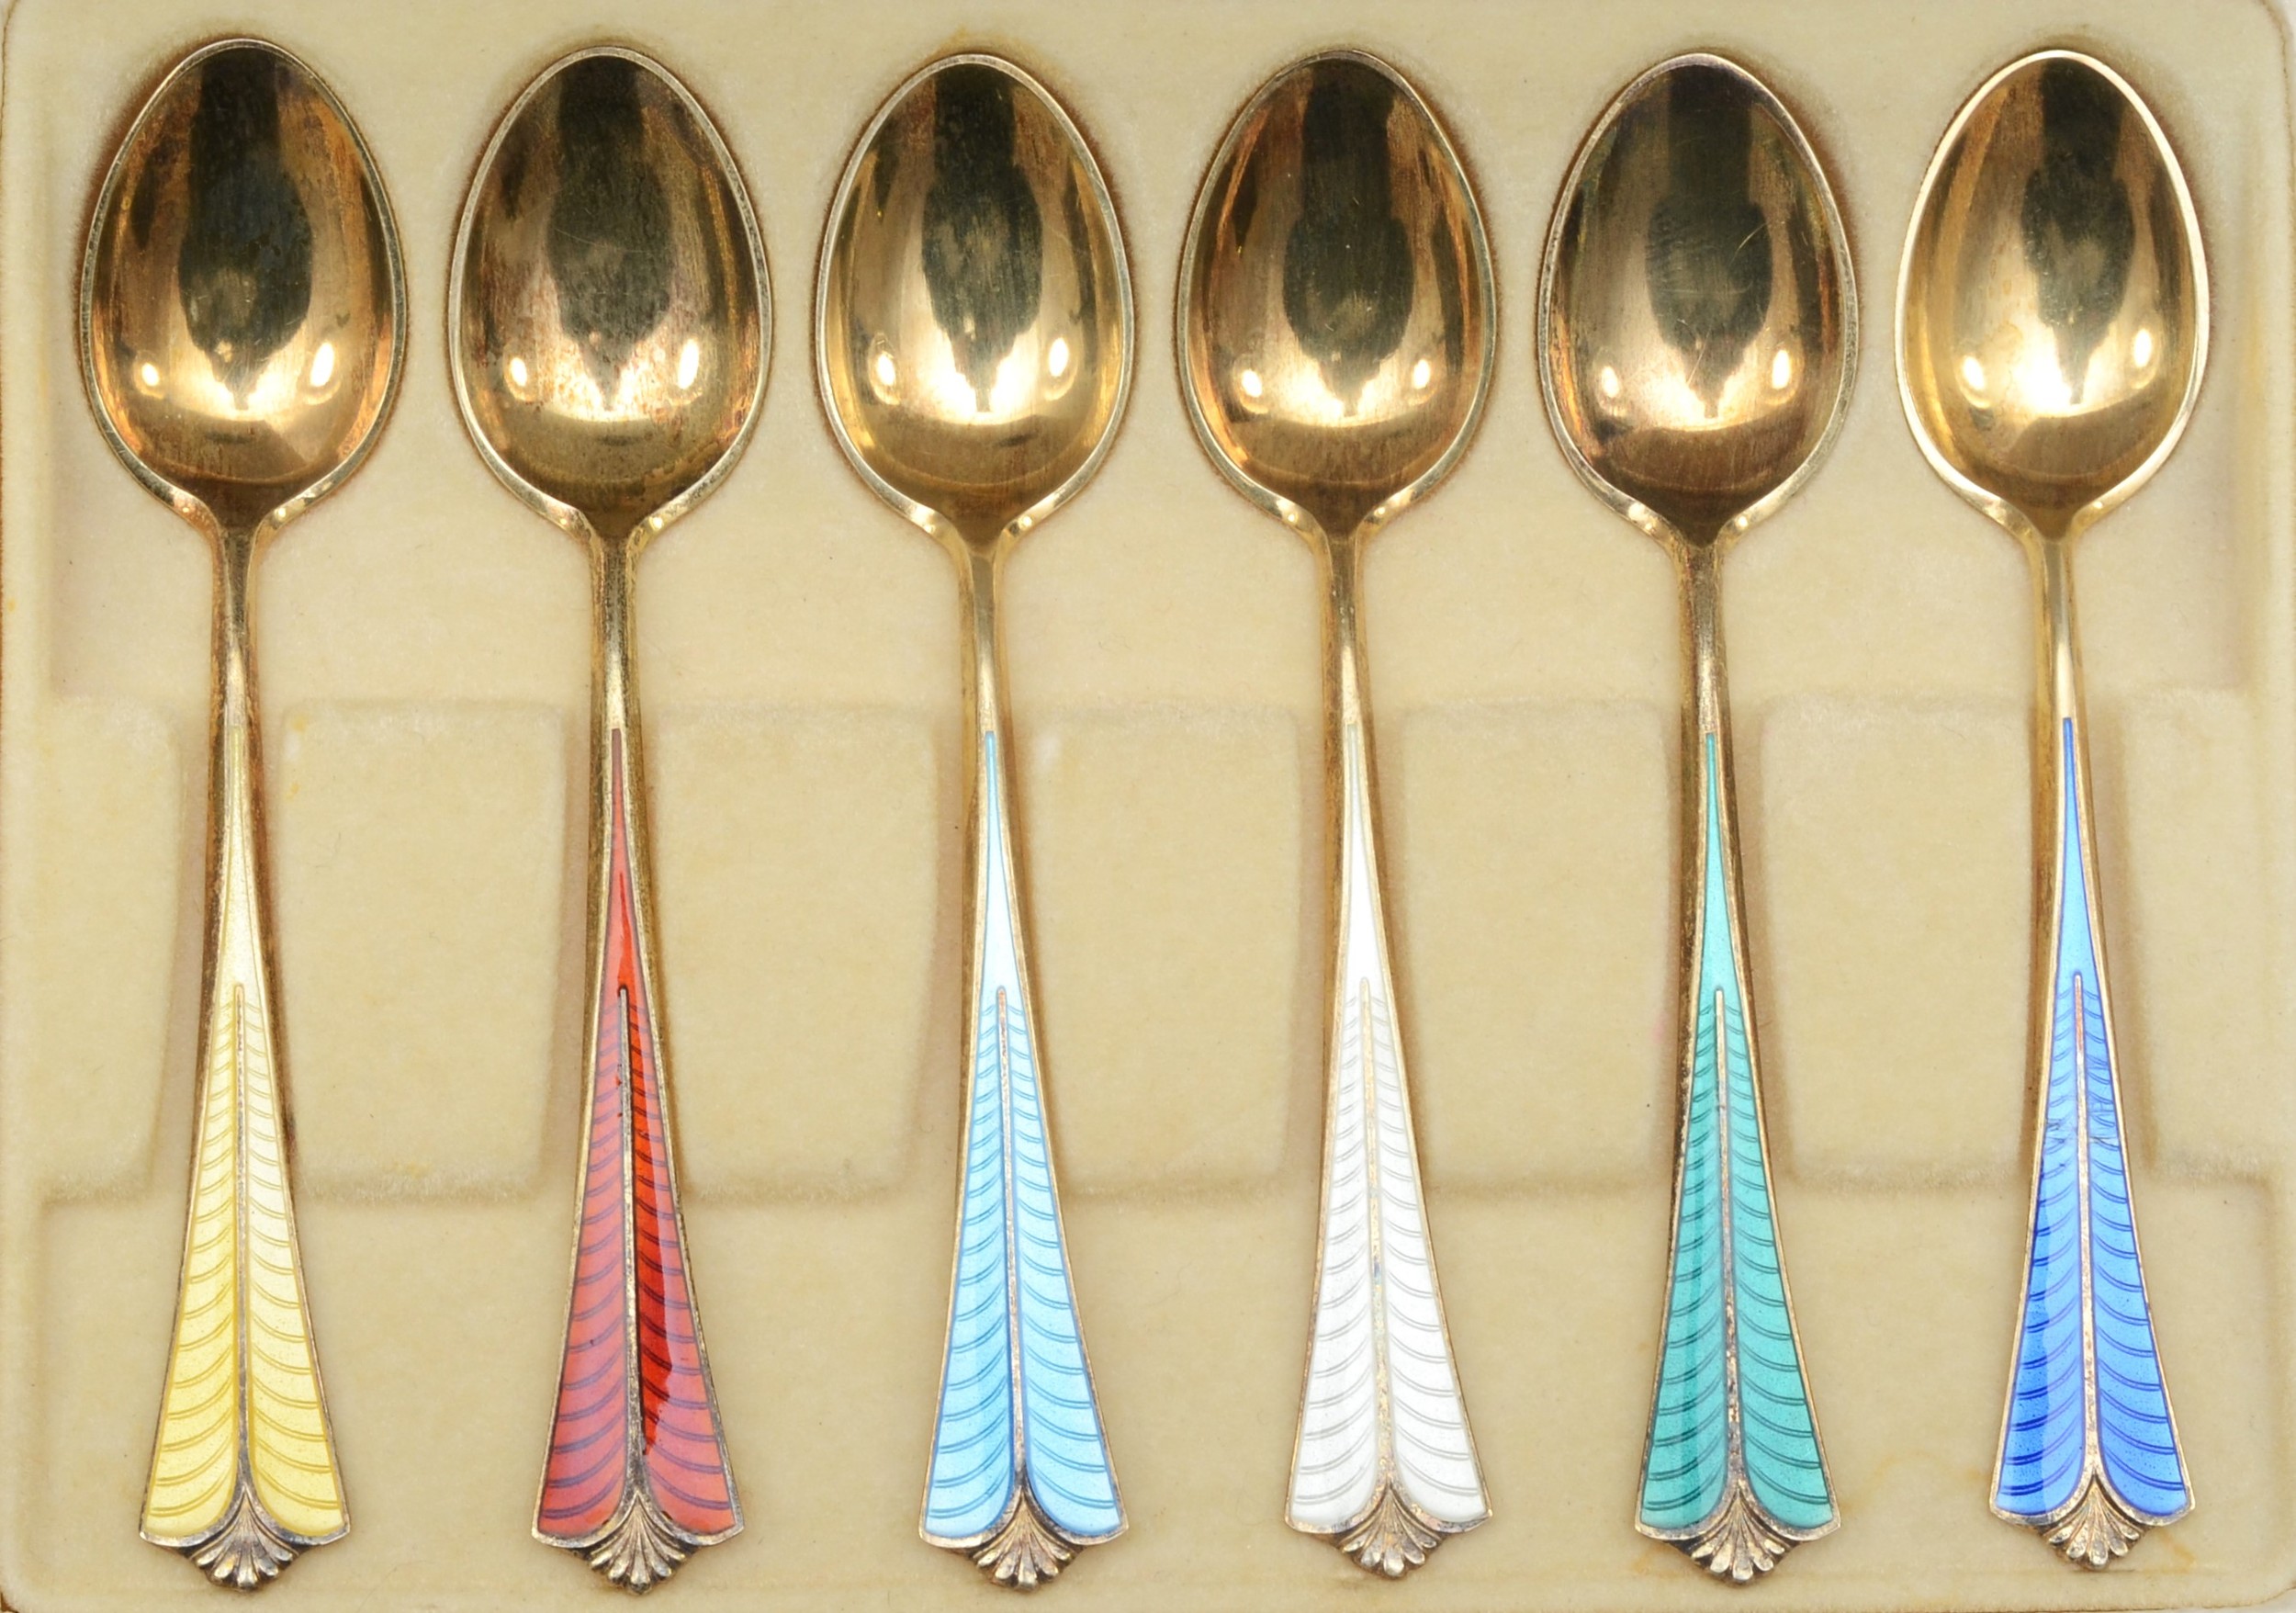 David Anderson, a Norwegian set of silver gilt and enamel coffee spoons, 57gm, original receipt - Image 2 of 2